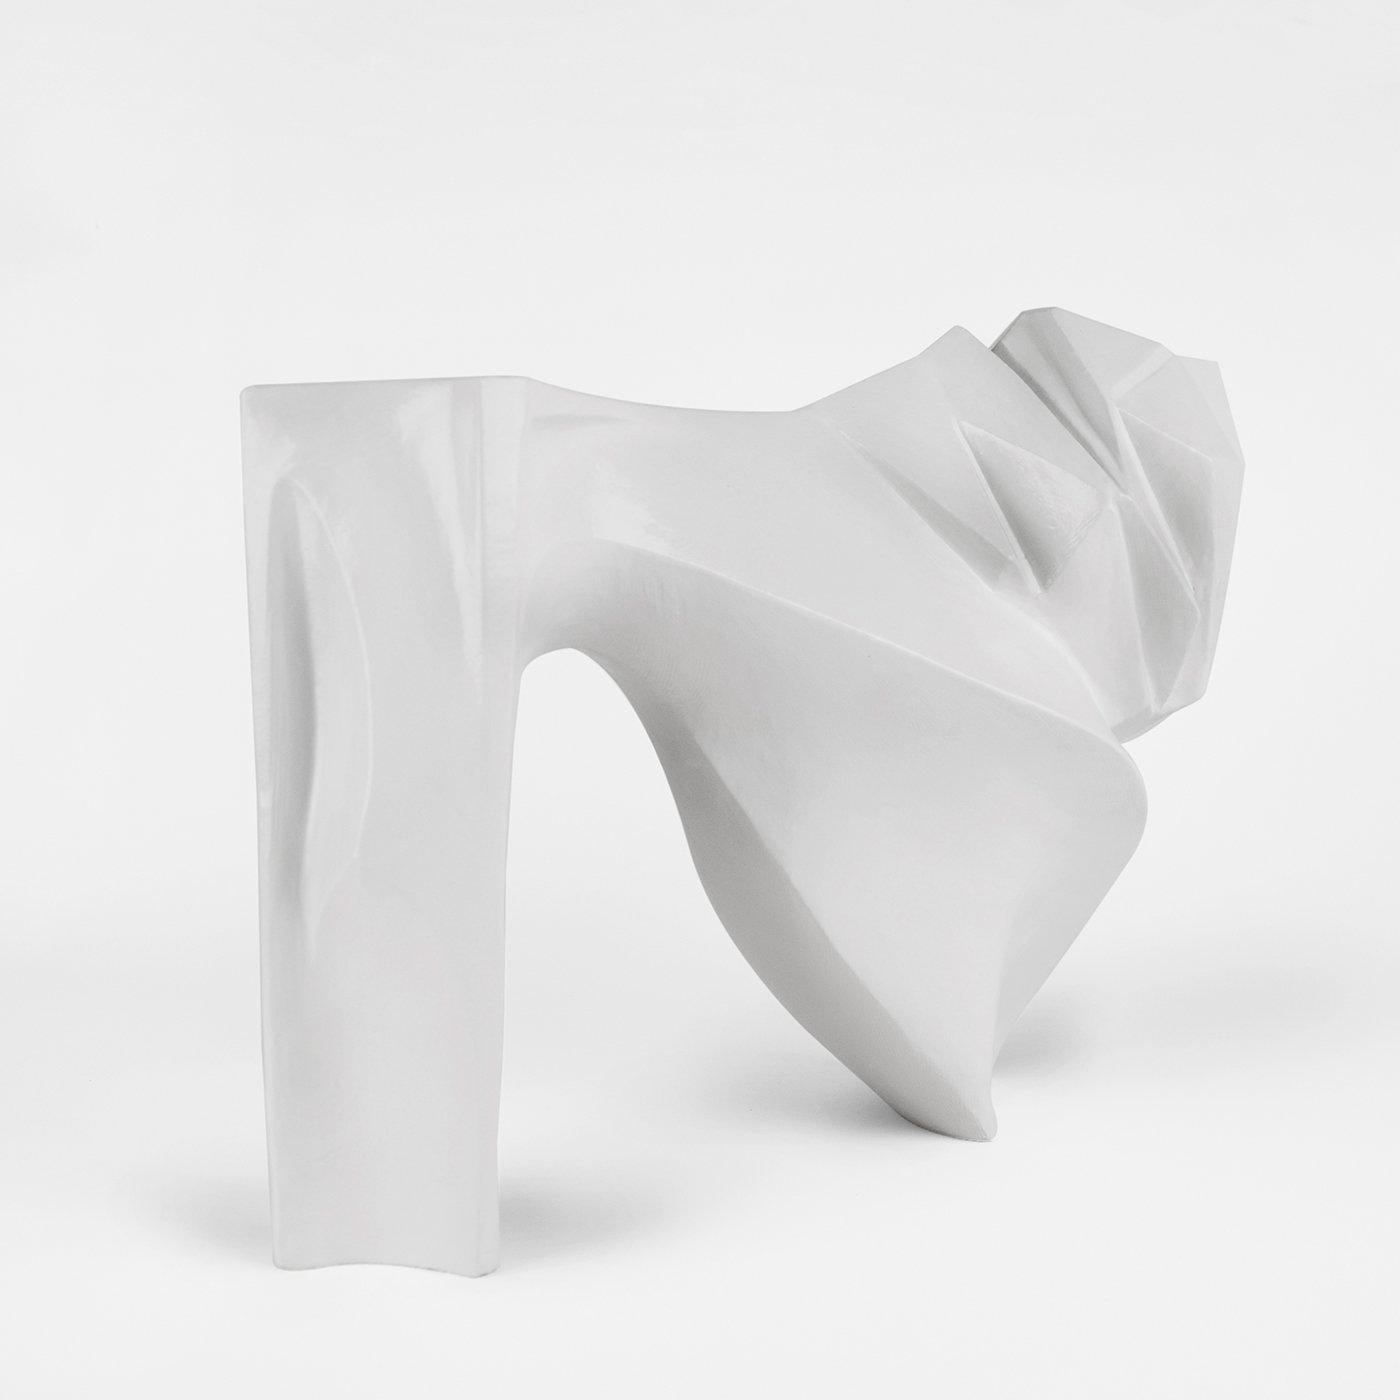 Artistic sculpture in grès in elegant and minimalist design, finished entirely by hand and produced in limited numbers. The model is made using a plaster mold and then individually remodelled by hand. The ceramic coating is a unique white satin